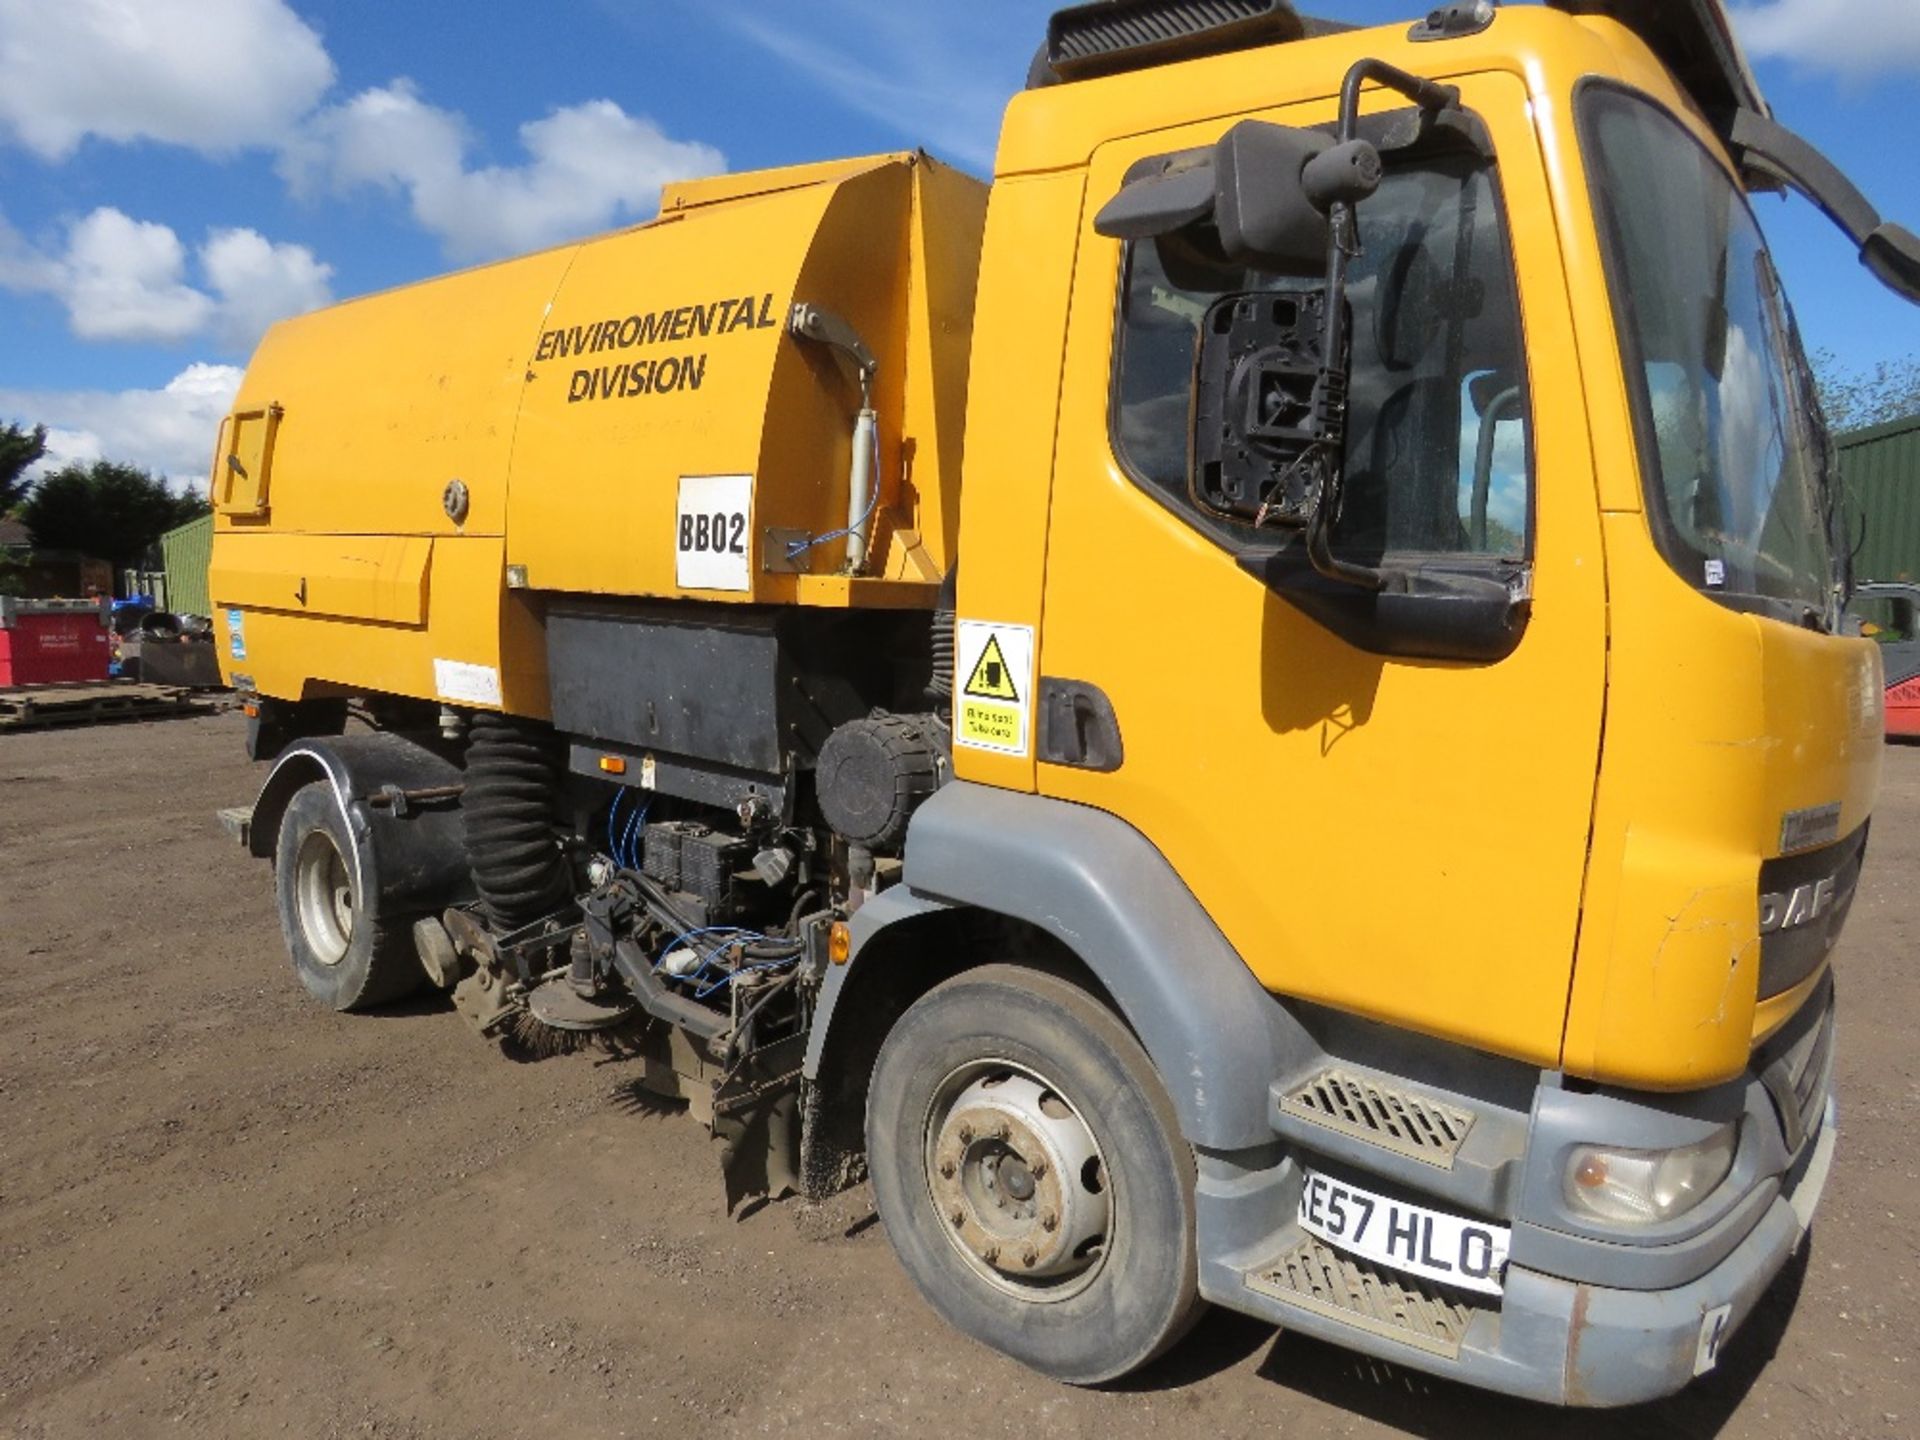 DAF LF JOHNSON ROAD SWEEPER REG:KE57 HLO. 131,934 REC KMS. WITH V5. MOT EXPIRED. FROM LOCAL COMPANY - Image 9 of 20